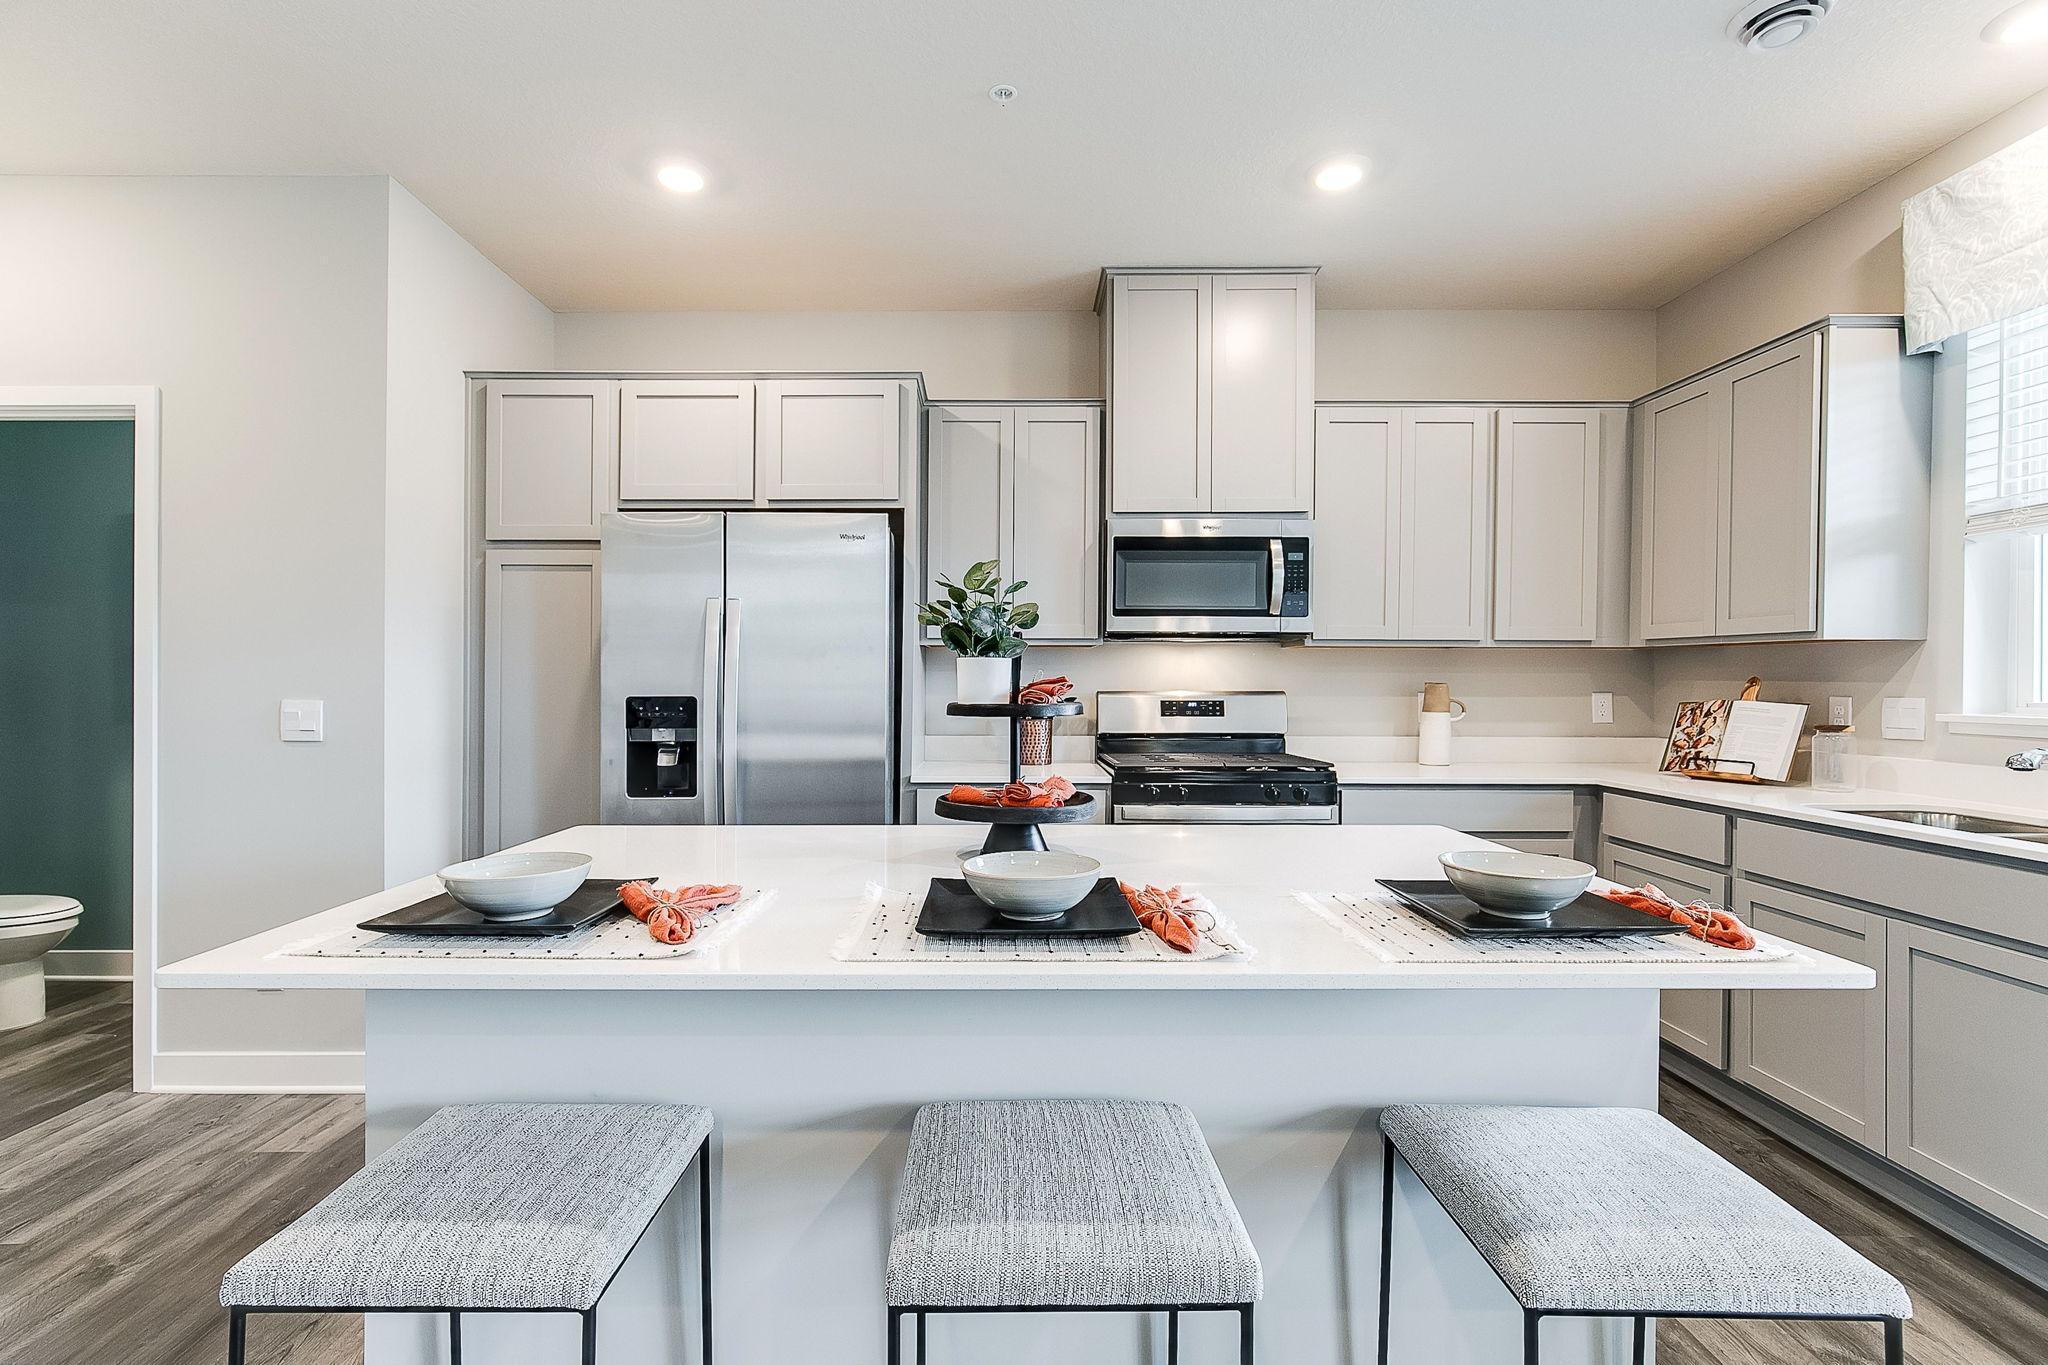 The Fairmont's kitchen offers a spacious center island for your entertaining and culinary needs. It is both functional and beautiful with the luxurious quartz countertops! *Photo is of model home, colors and selections shown may vary.